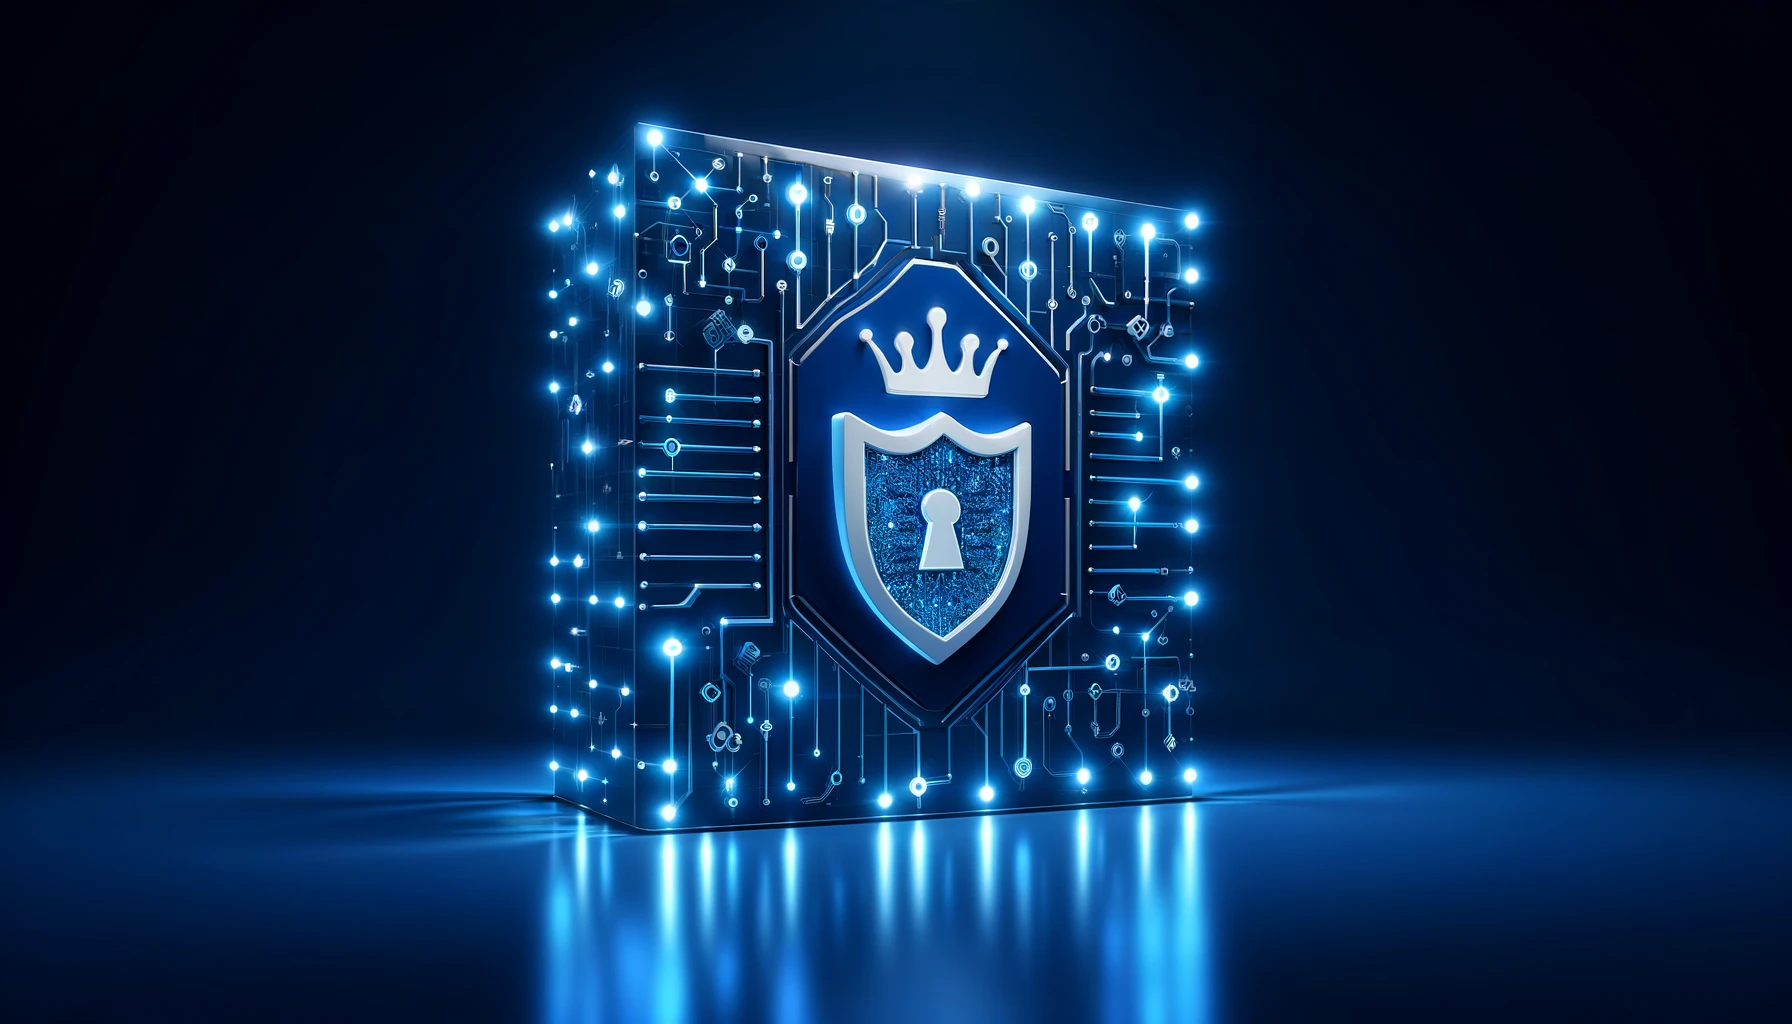 A modern, clean tech-themed cover image with a blue color scheme. The image features a digital wall composed of glowing blue circuitry patterns, symbolizing protection. Behind this digital wall, there is a crown, glowing with a soft blue light, representing an application firewall.